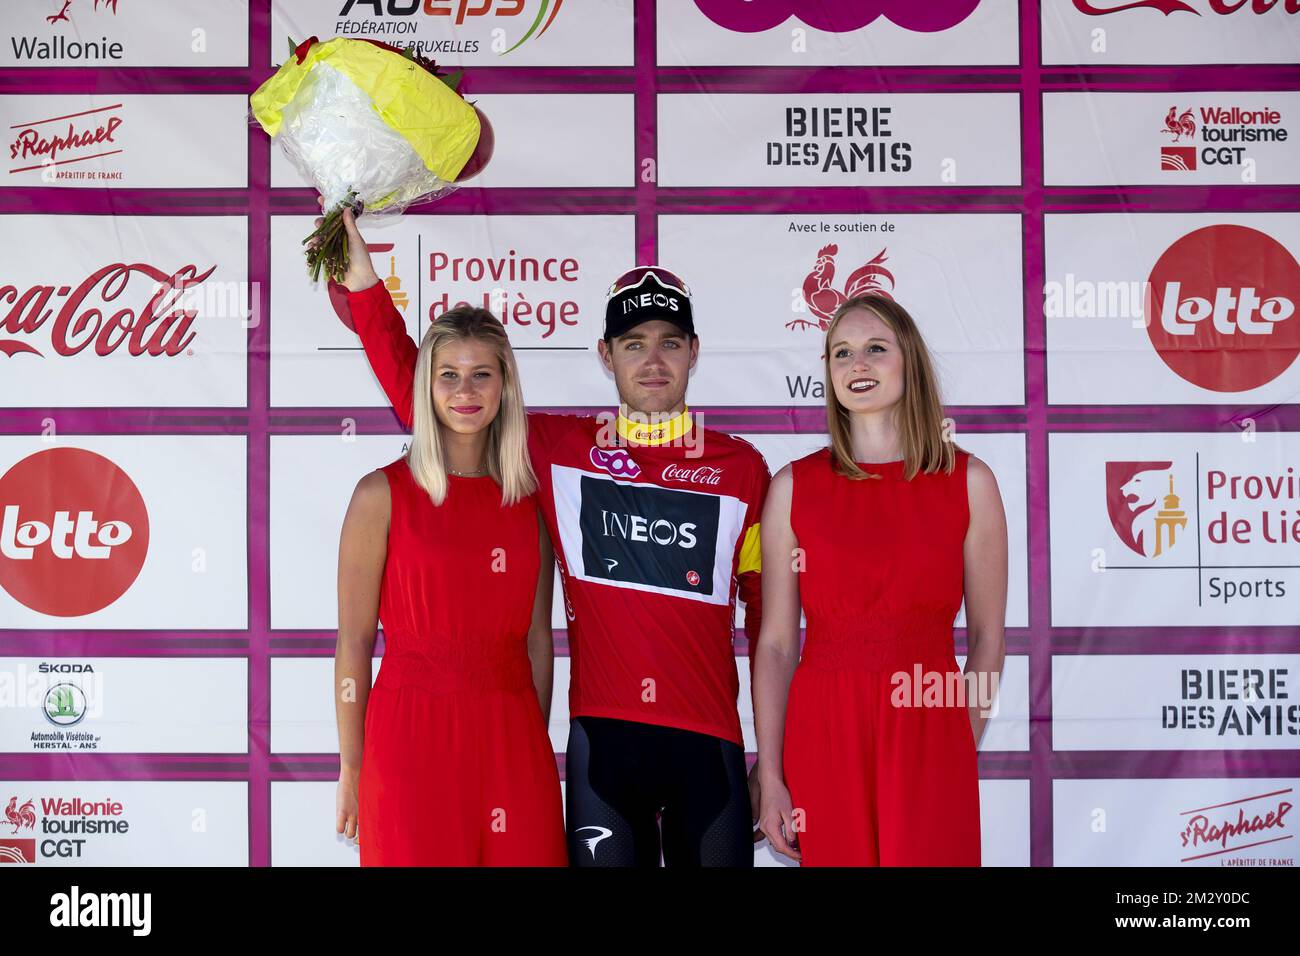 British Chris Lawless of Team Ineos, wearing the red jersey, pictured on the podium after the third stage of the Tour De Wallonie cycling race, 194,2 km from La Roche-en-Ardenne to Verviers, on Monday 29 July 2019. BELGA PHOTO KRISTOF VAN ACCOM Stock Photo